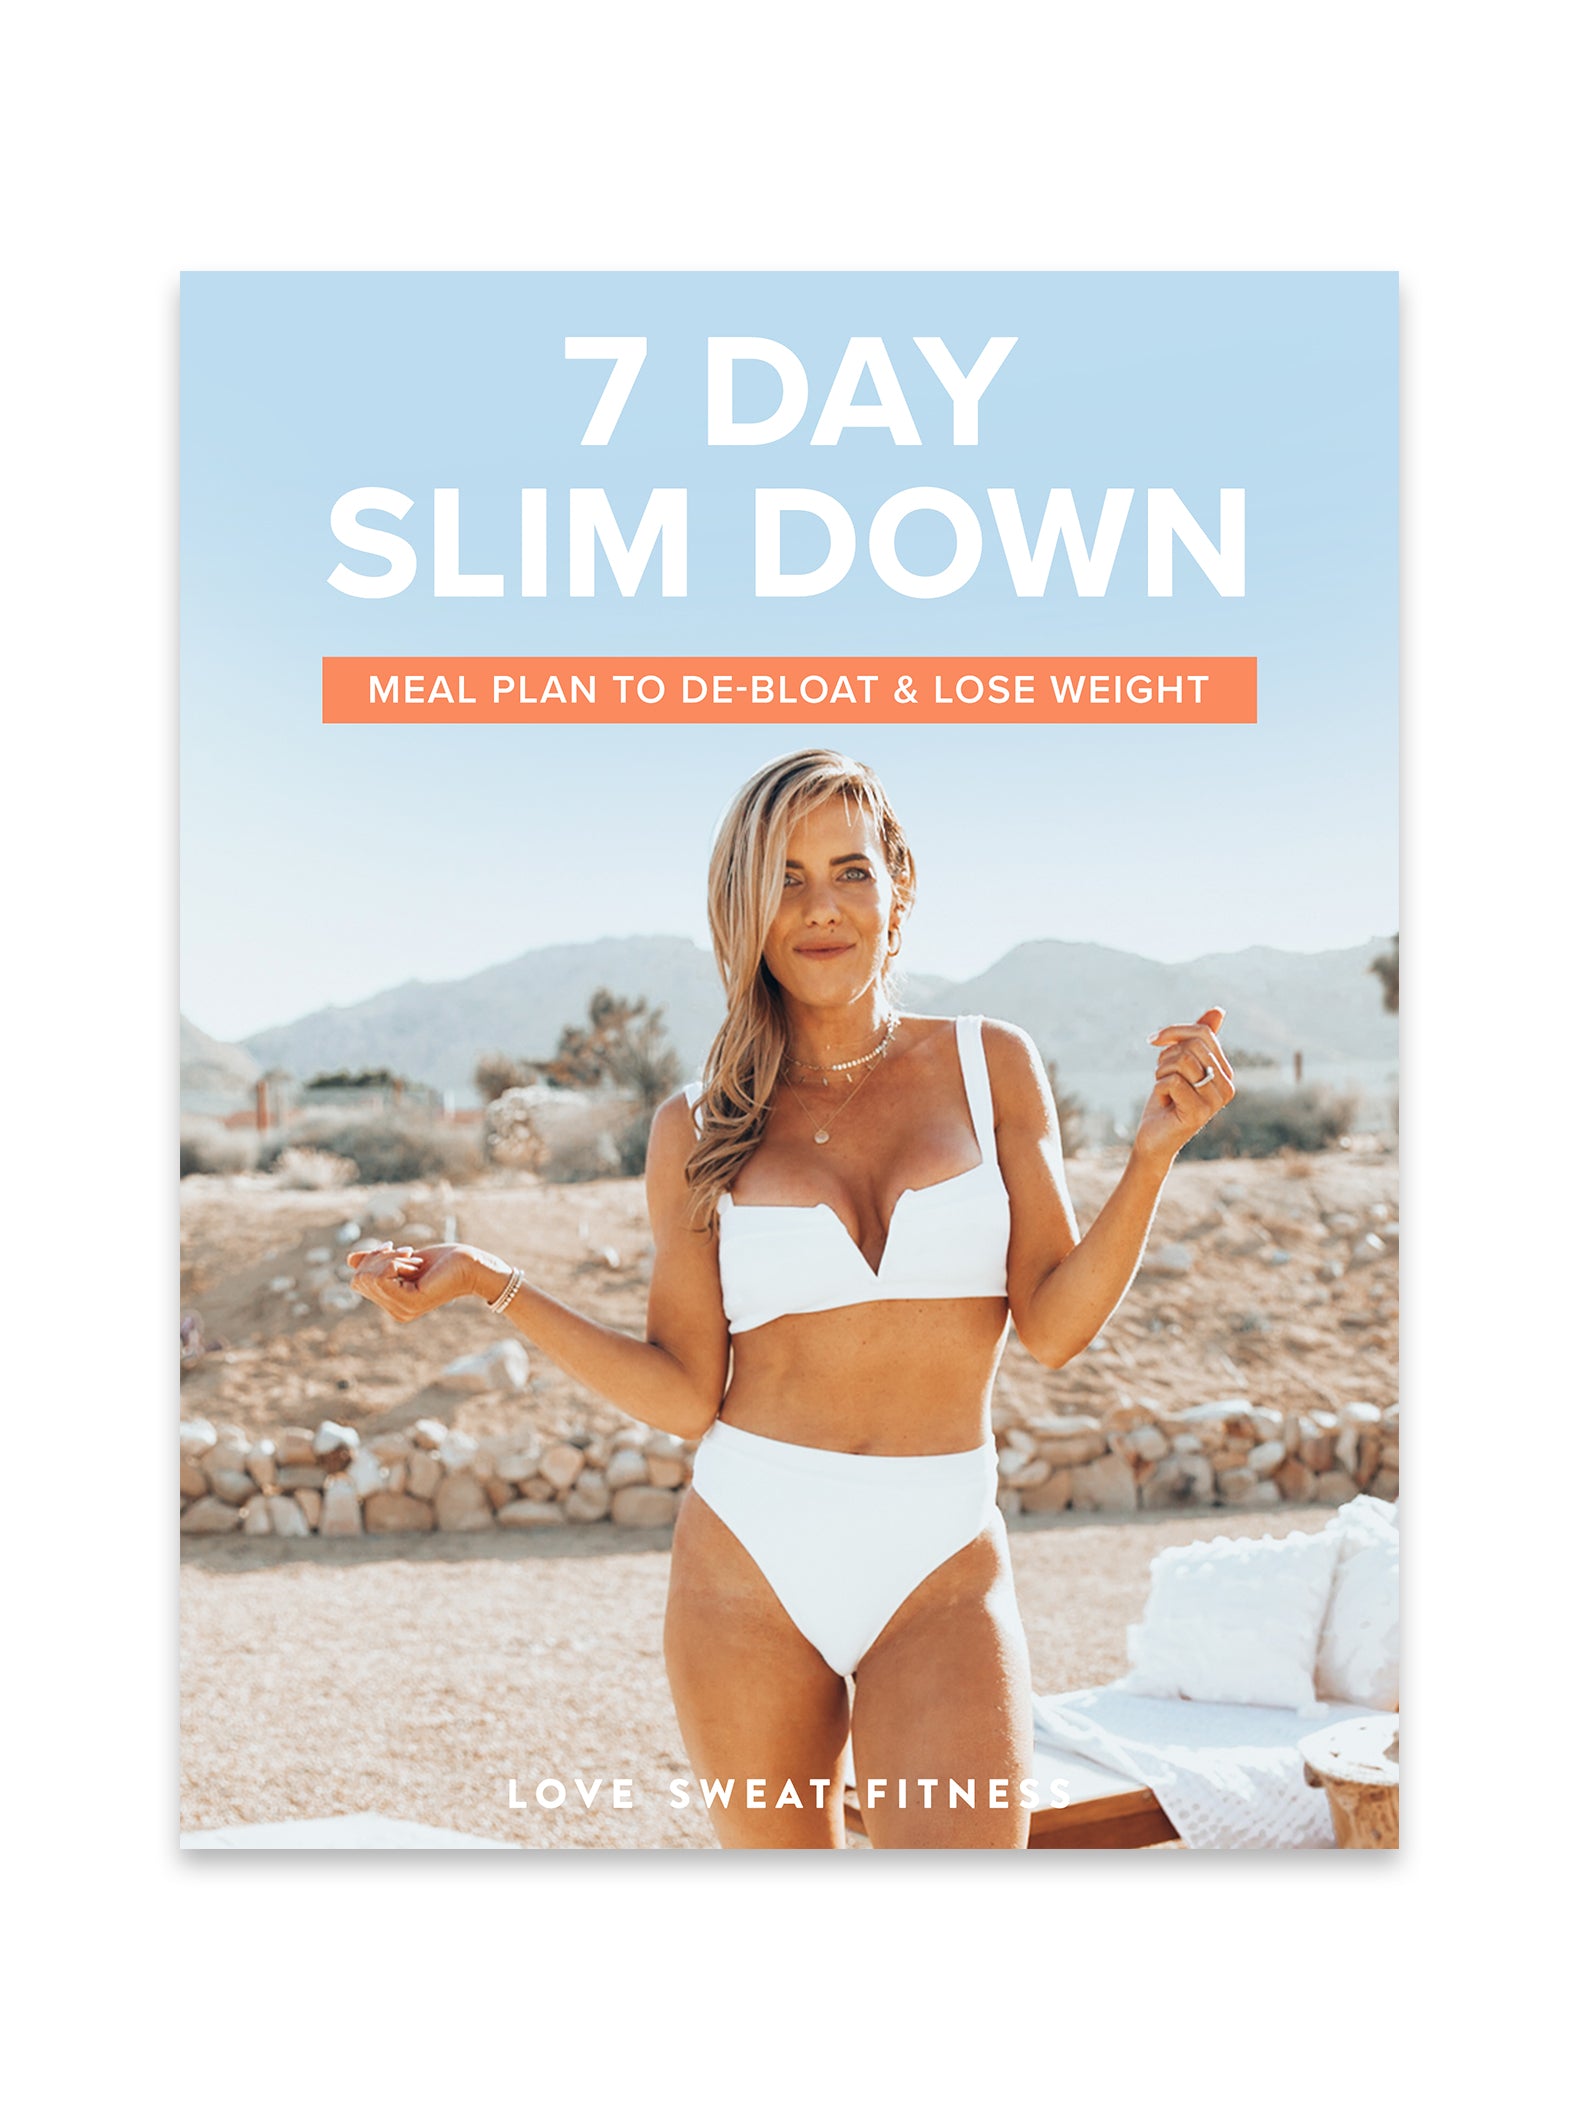 How to Slim Down Your Body in 7 Days